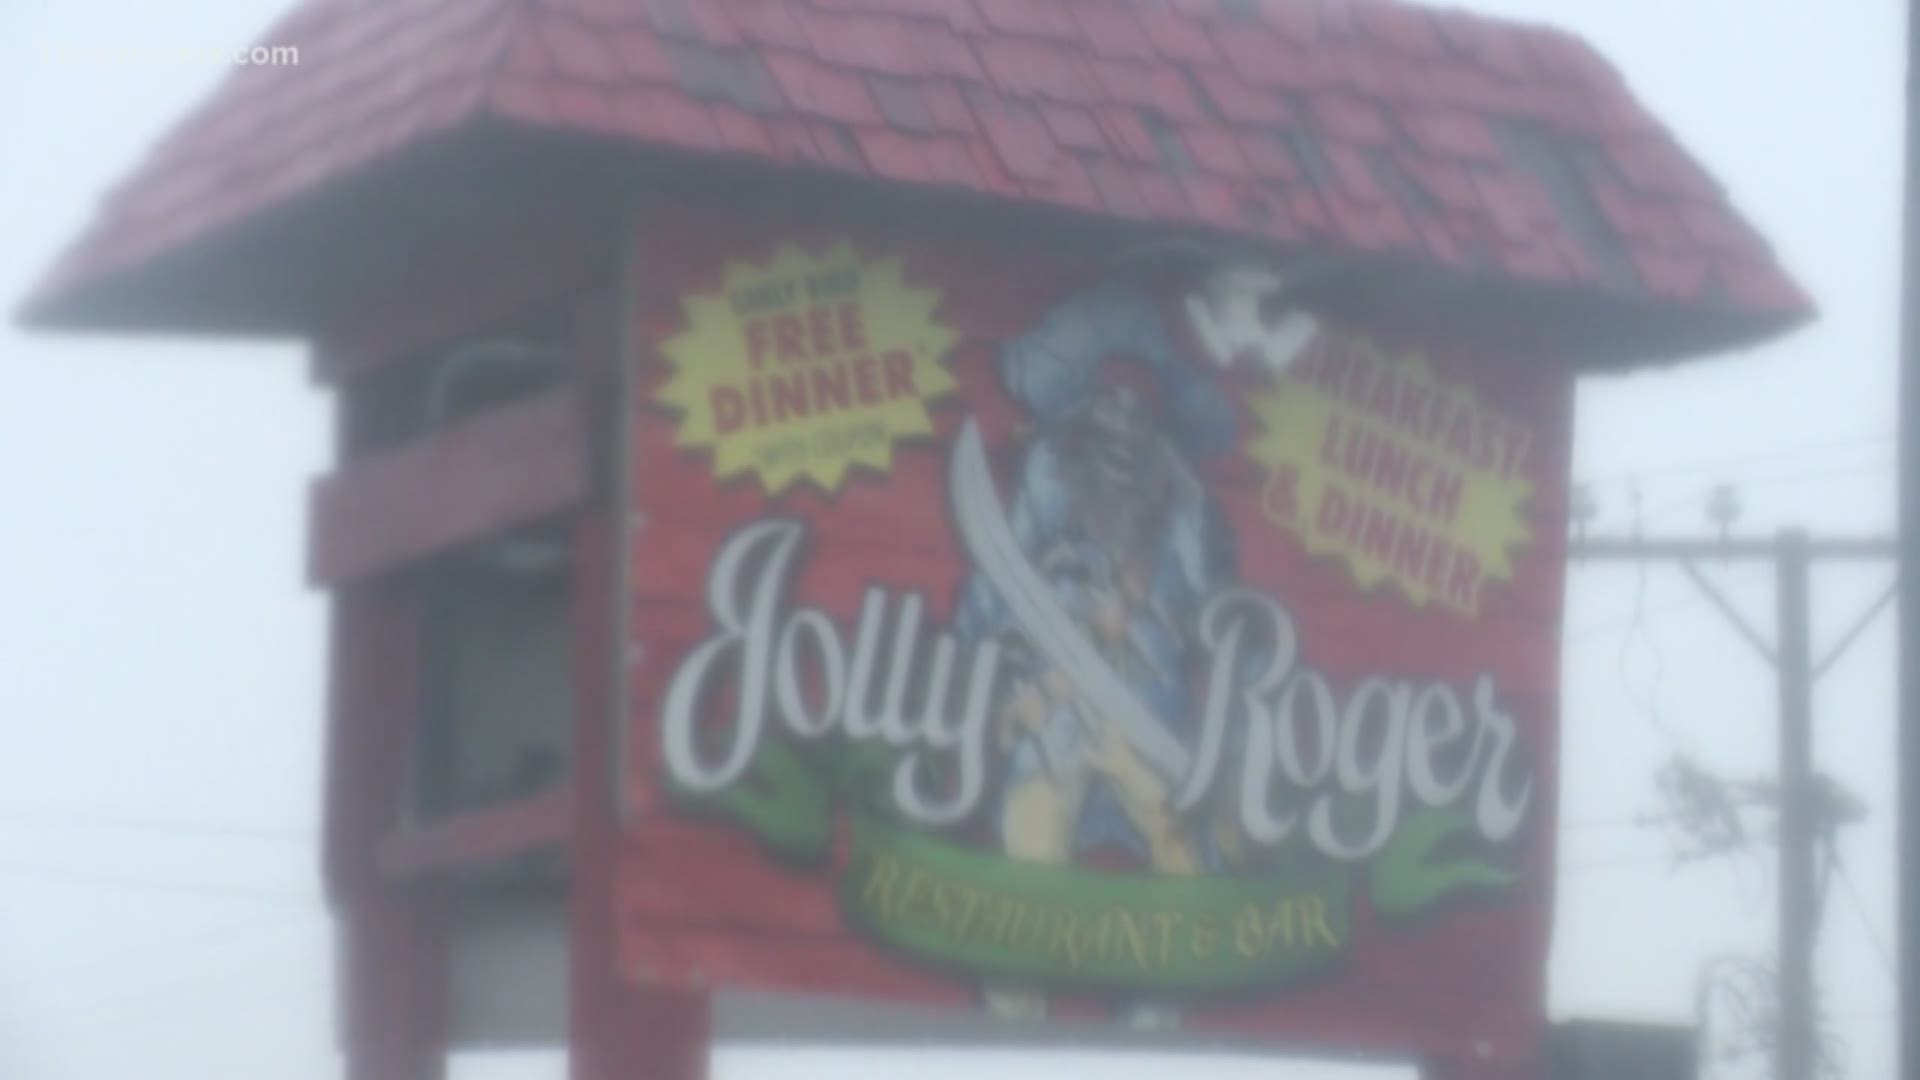 Hurricane Dorian dealt some damage to homes and and property in Kill Devil Hills. But for some residents, the real barometer for how powerful Dorian was--was the fact the Jolly Roger had to close its doors.